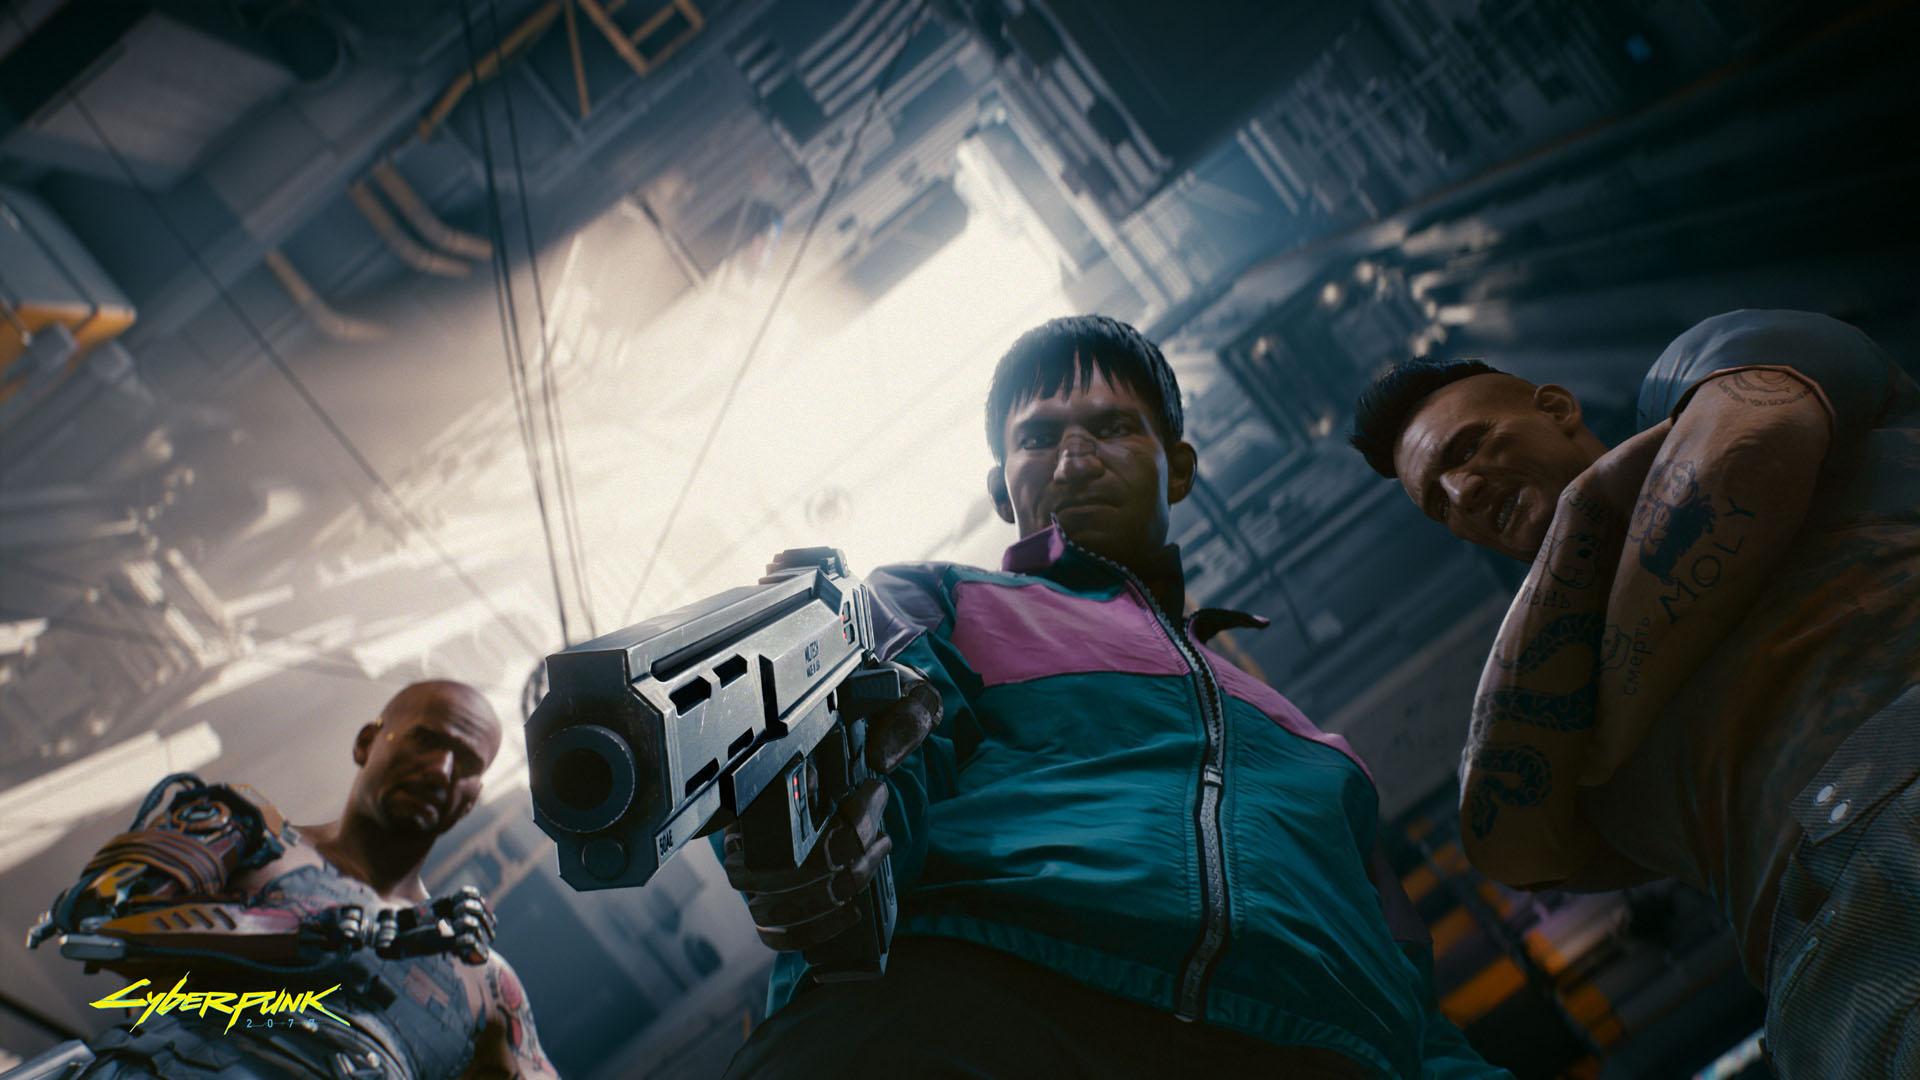 Cyberpunk 2077 May Be the Best Game of E3 2019